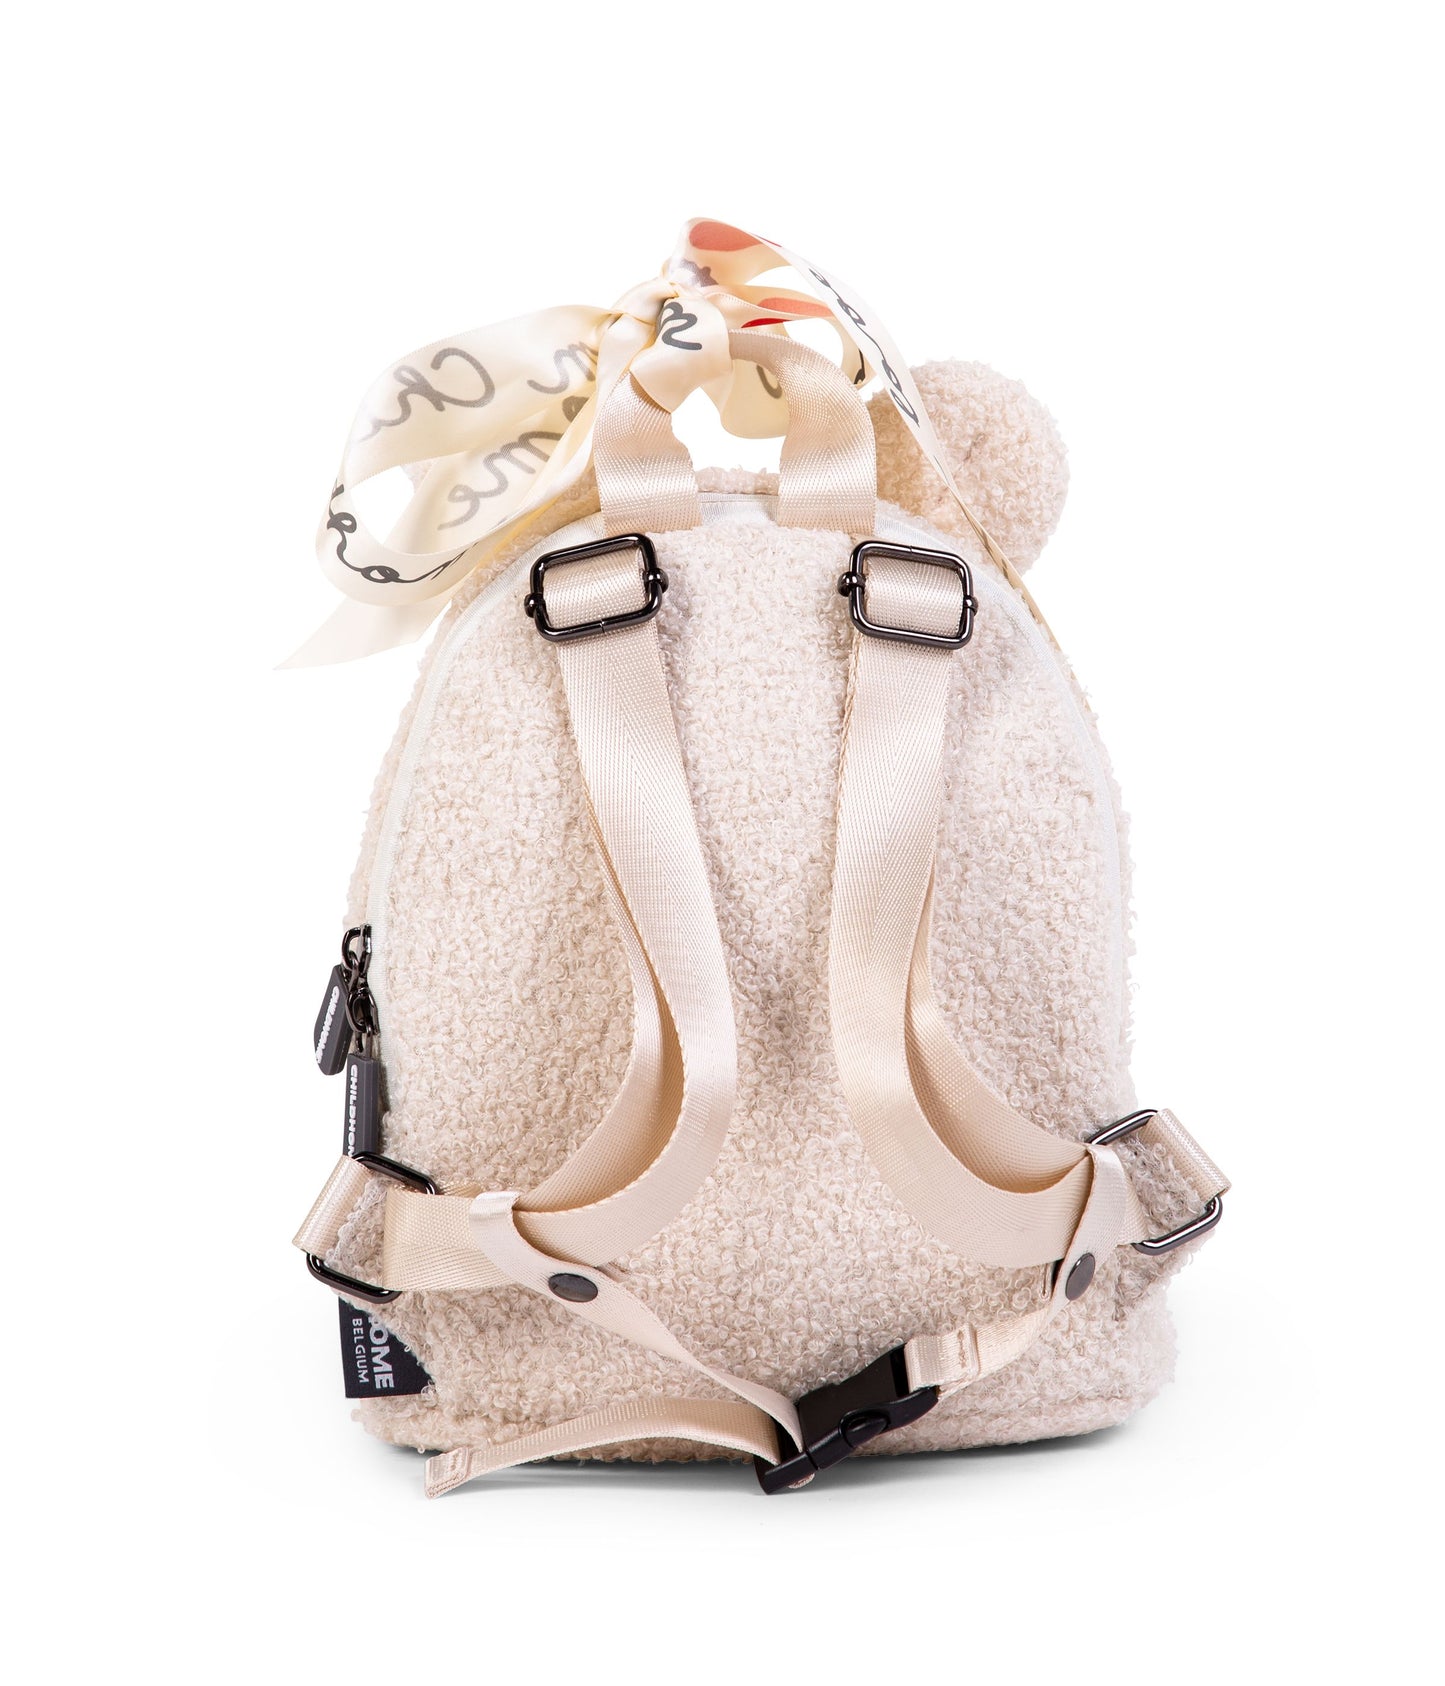 My first bag children's backpack - Teddy Off white